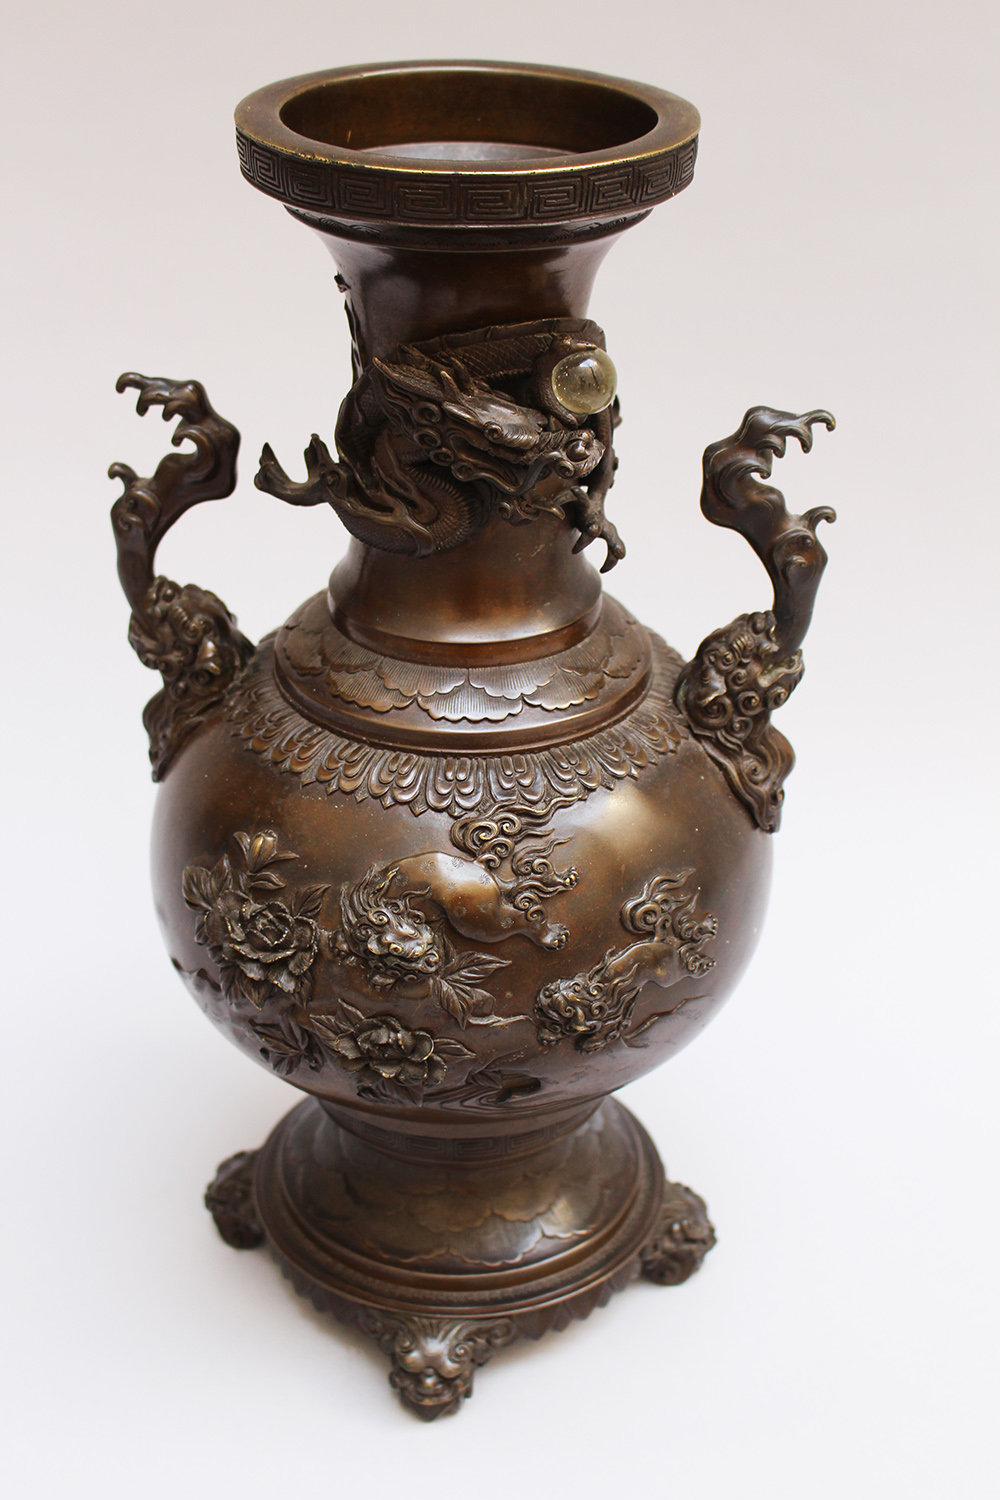 Chinese Bronze vase in urn shape on central feed with long neck and two handgrips, bronze cast